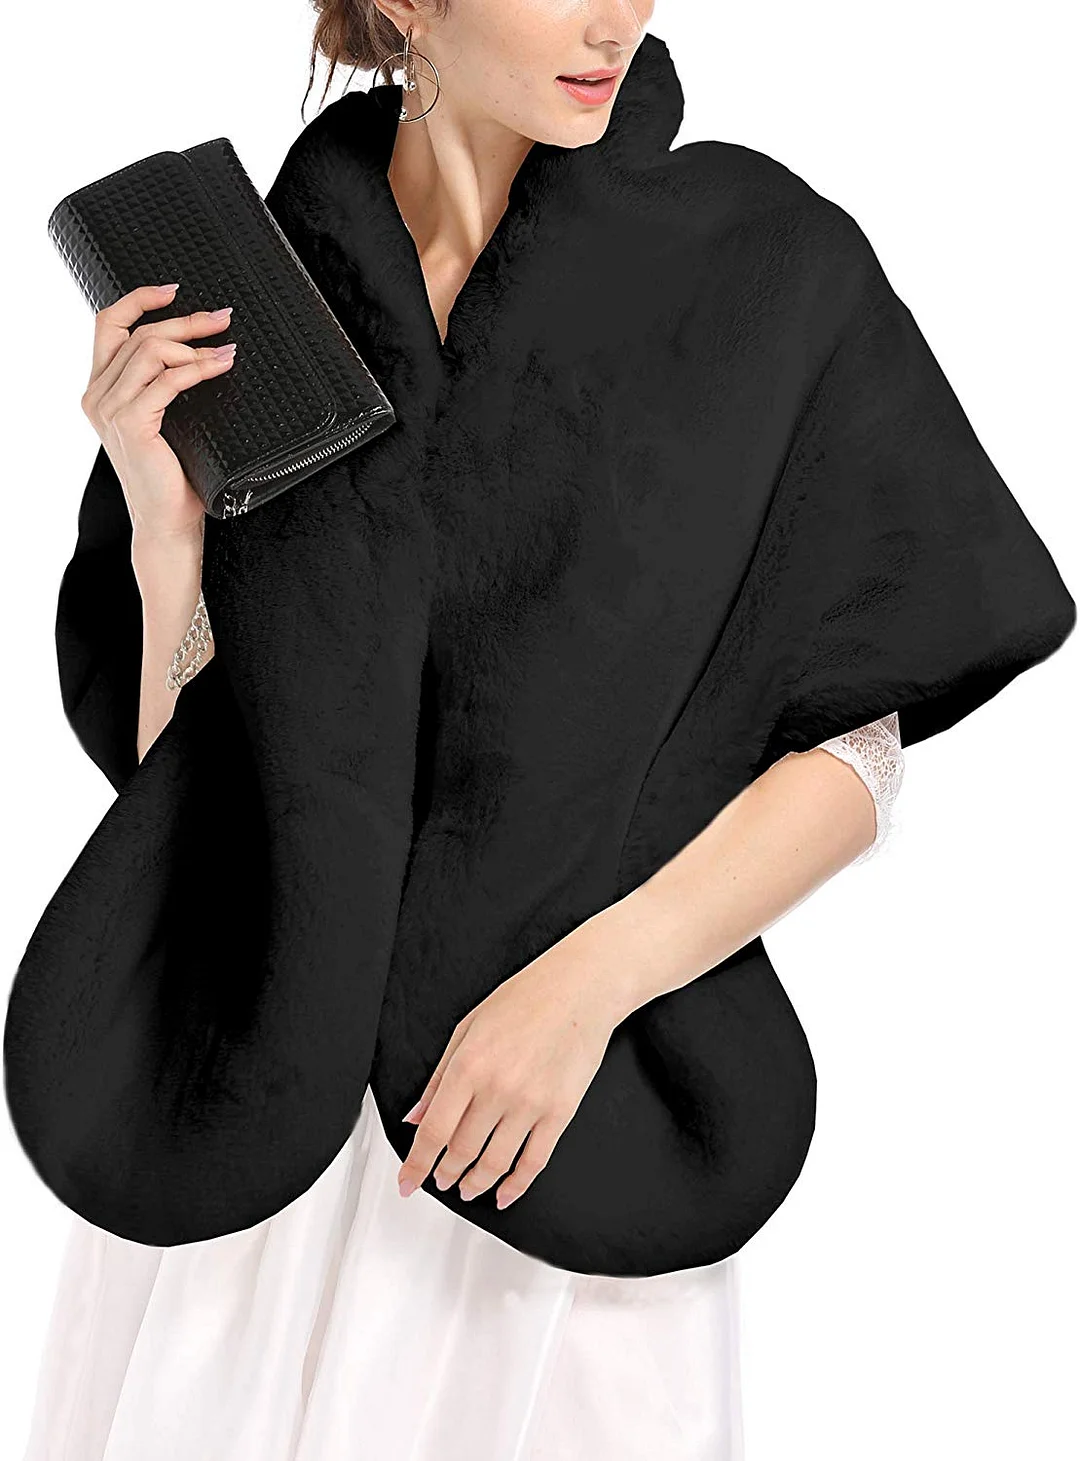 Faux Fur Wedding Wrap Shawl Long Cape Bridal Wraps and Shrugs for Winter Wedding Evening Party